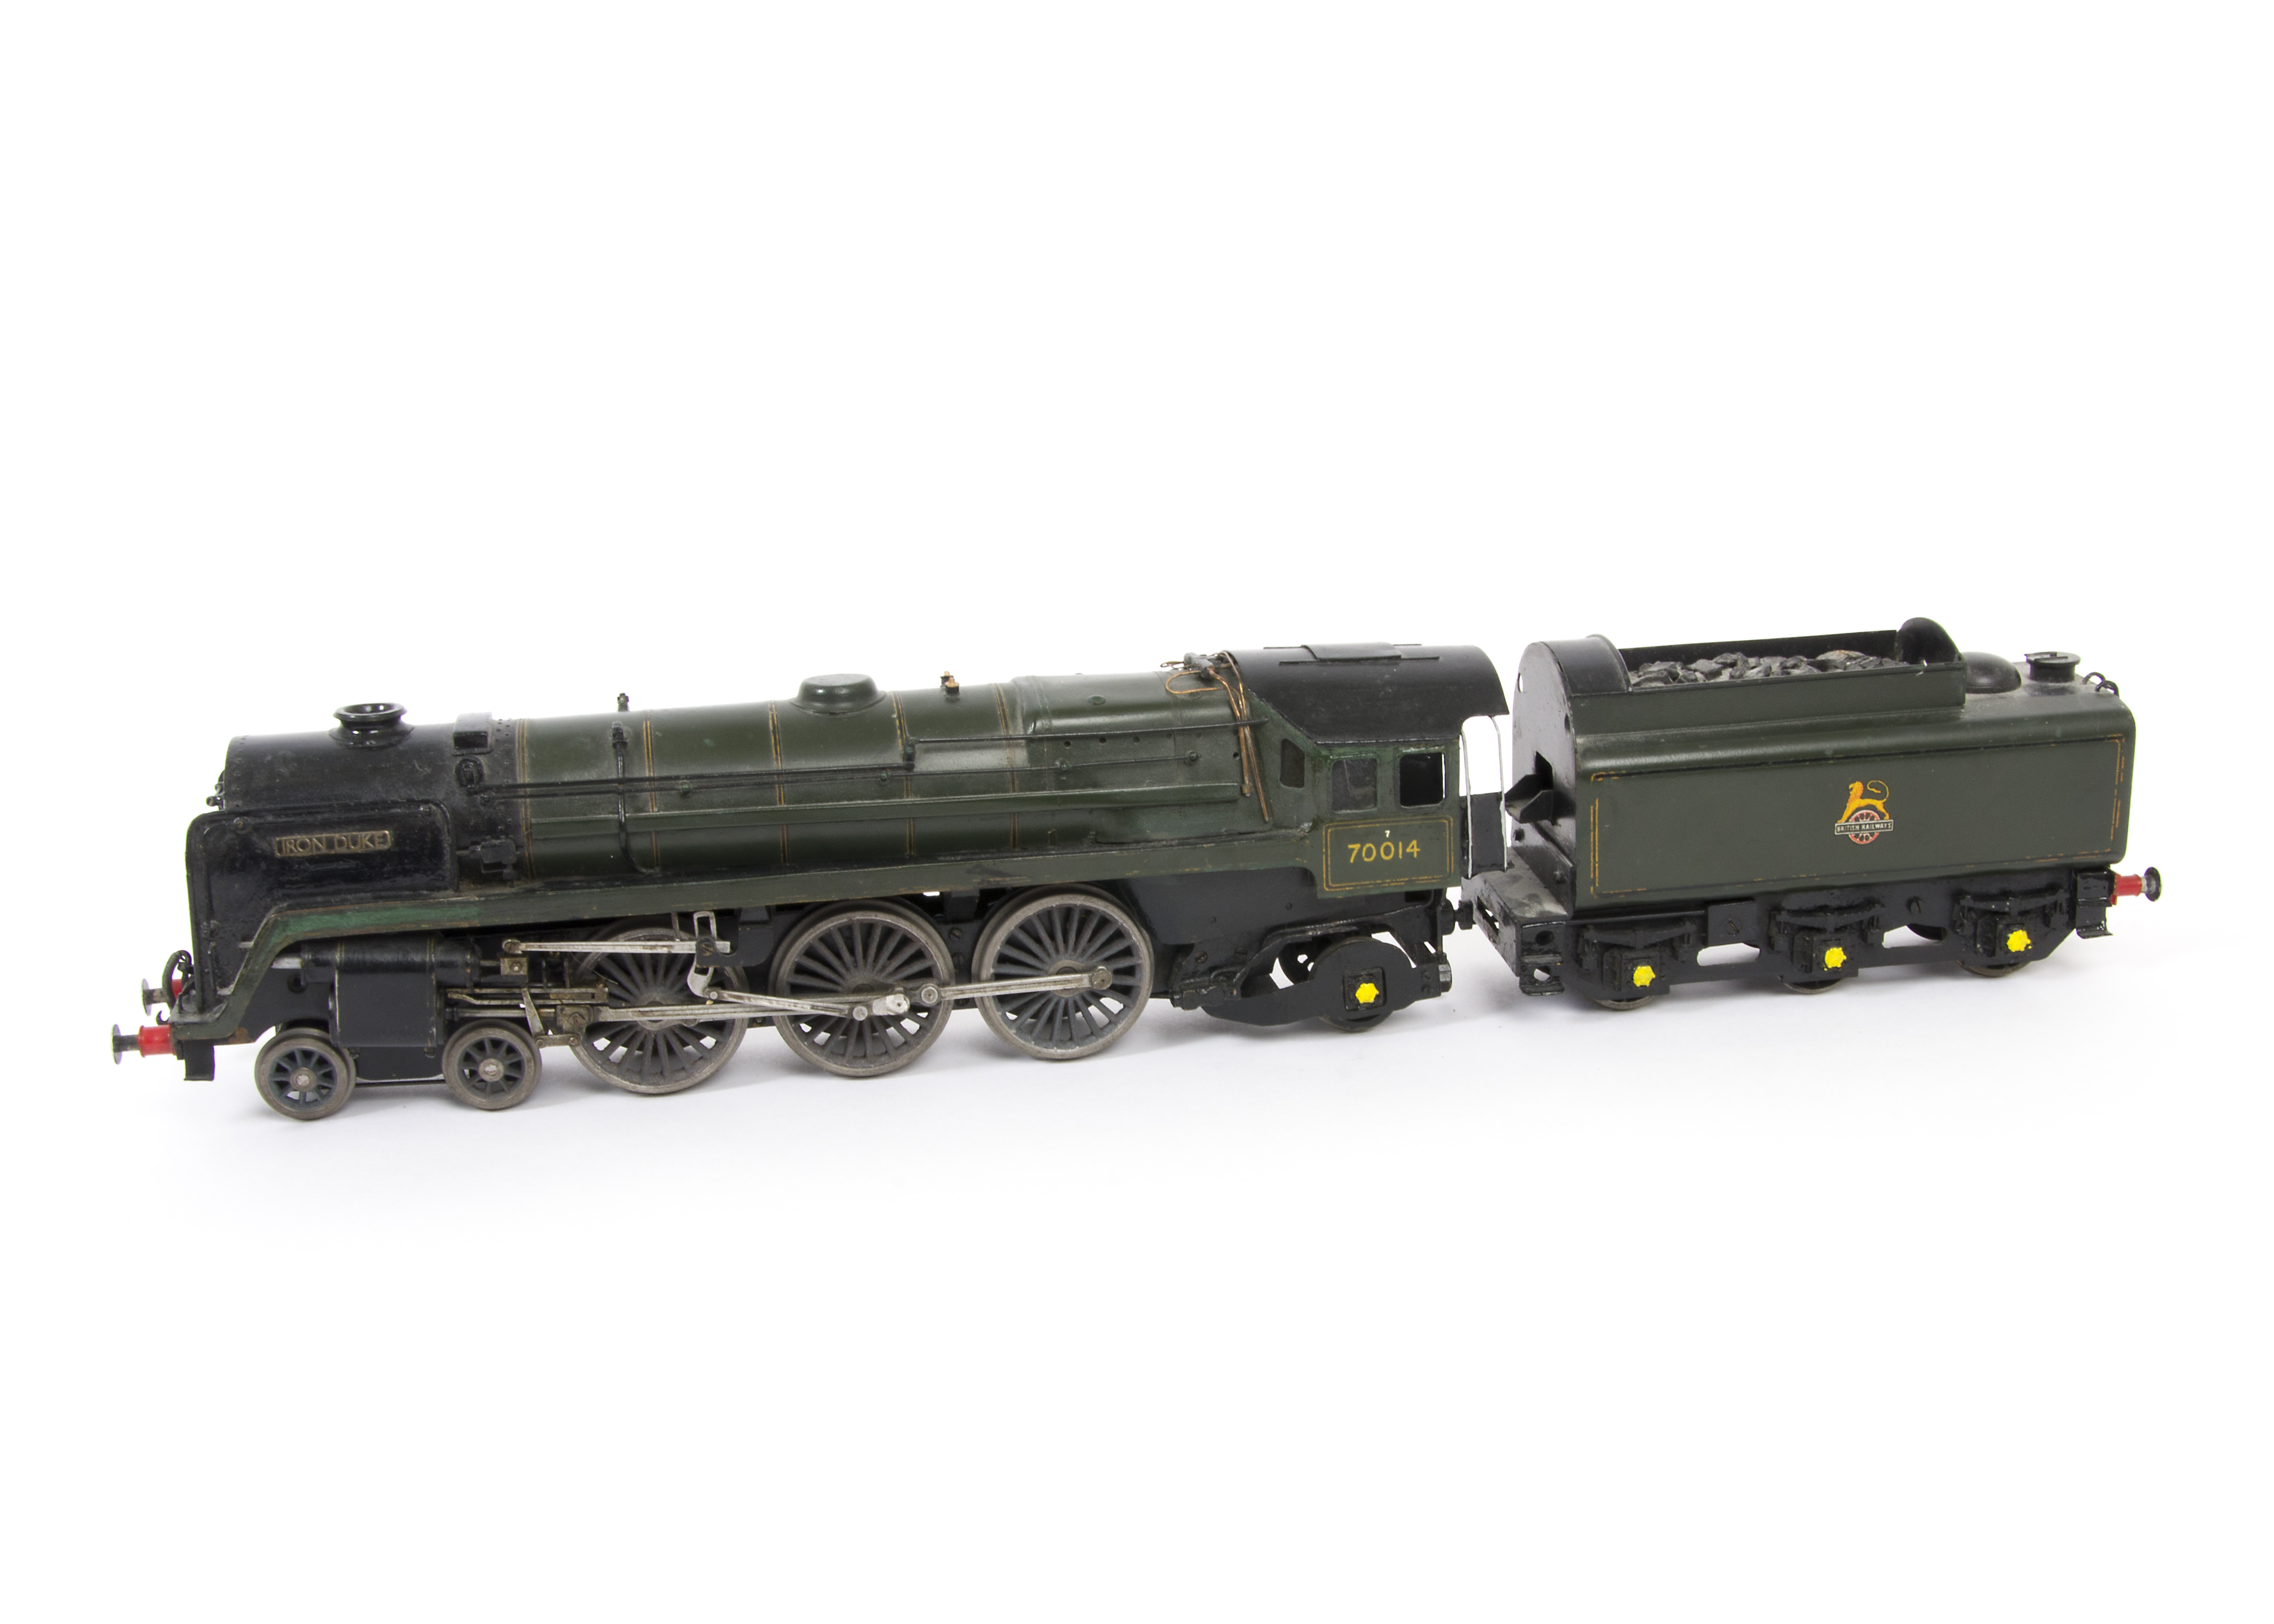 A Finescale O Gauge Kit-built BR Standard Class 7P 'Britannia' 4-6-2 Locomotive and Tender from